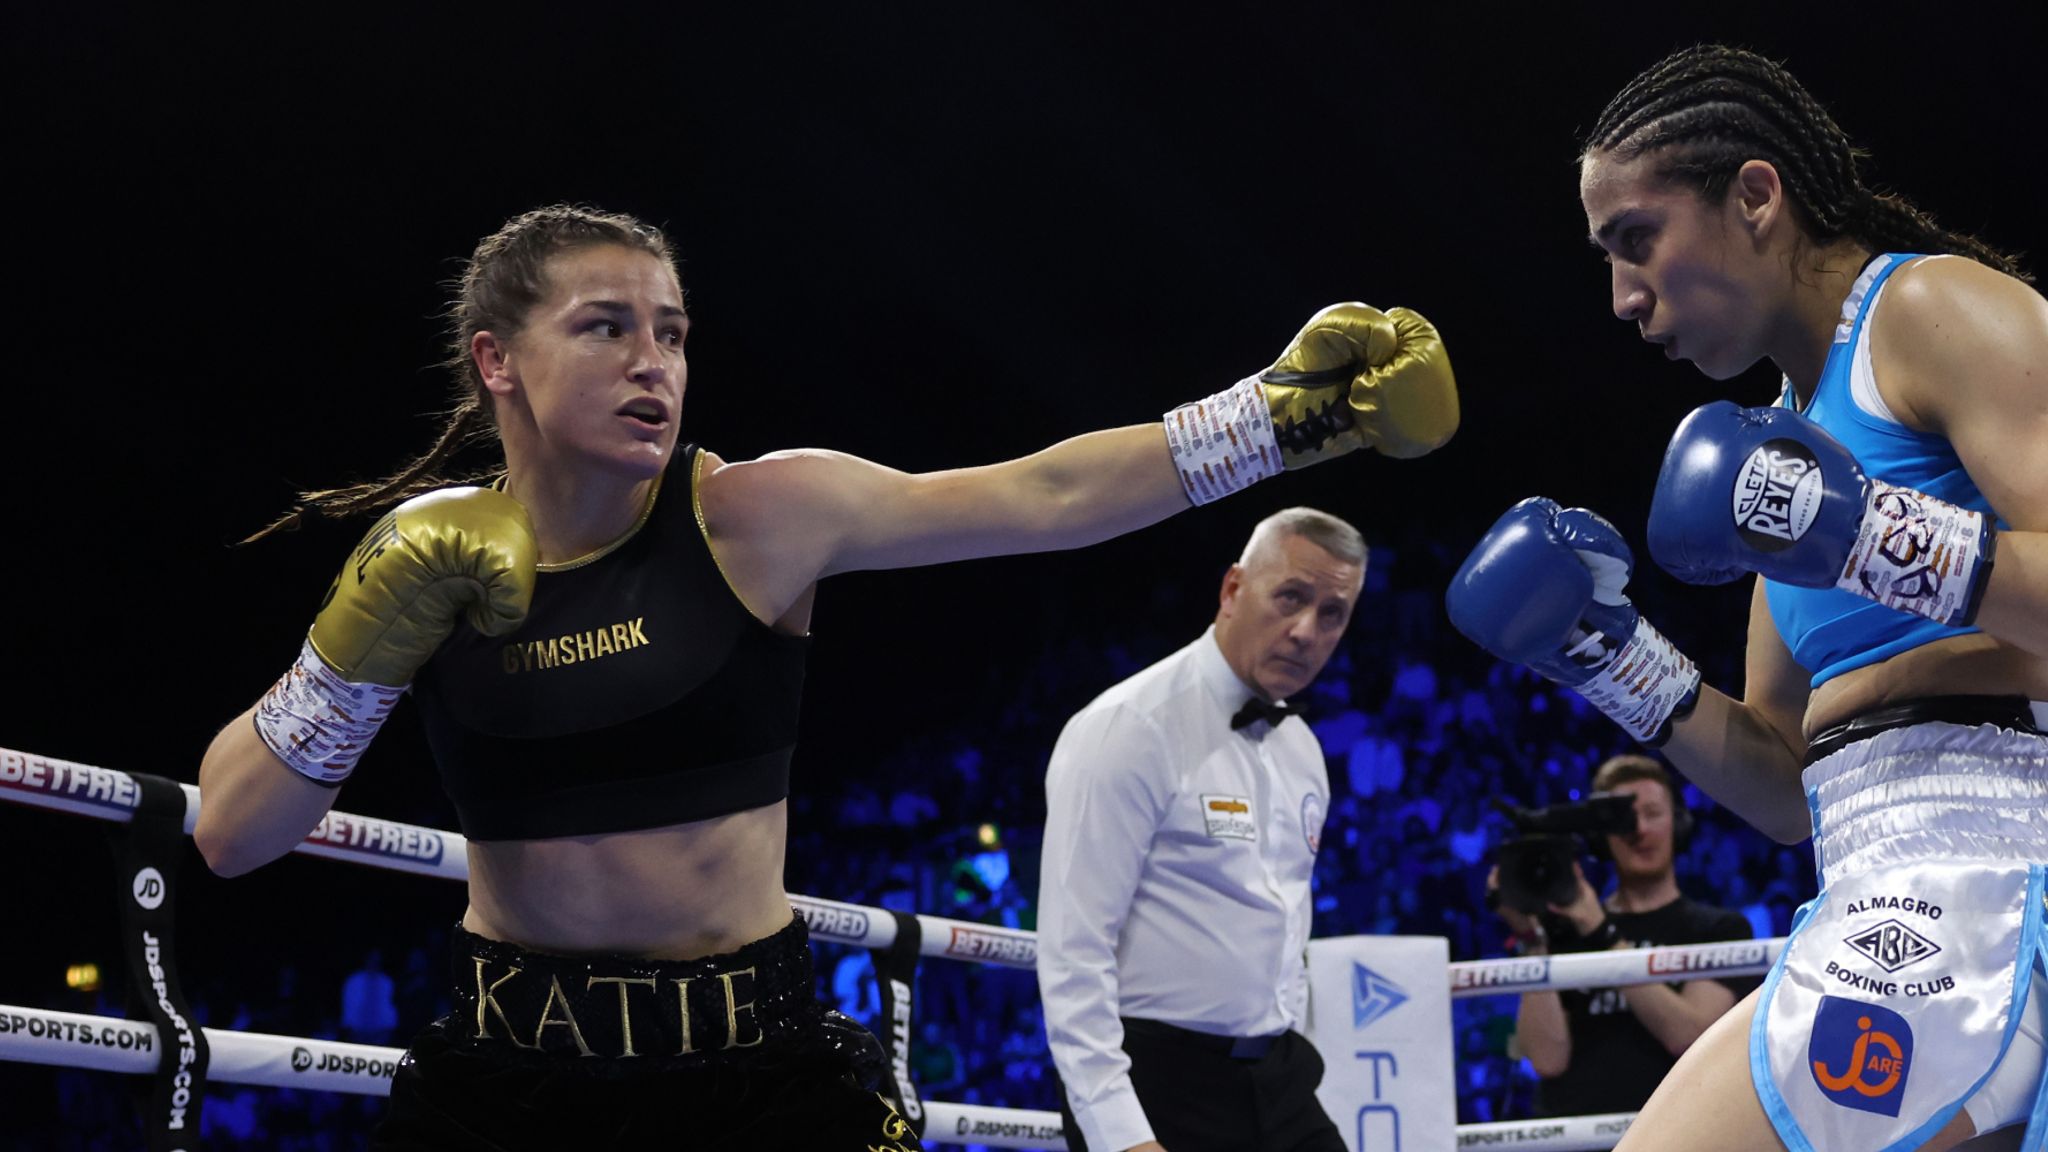 Katie Taylor takes clear unanimous decision over Karen Elizabeth Carabajal to defend undisputed lightweight championship Boxing News Sky Sports